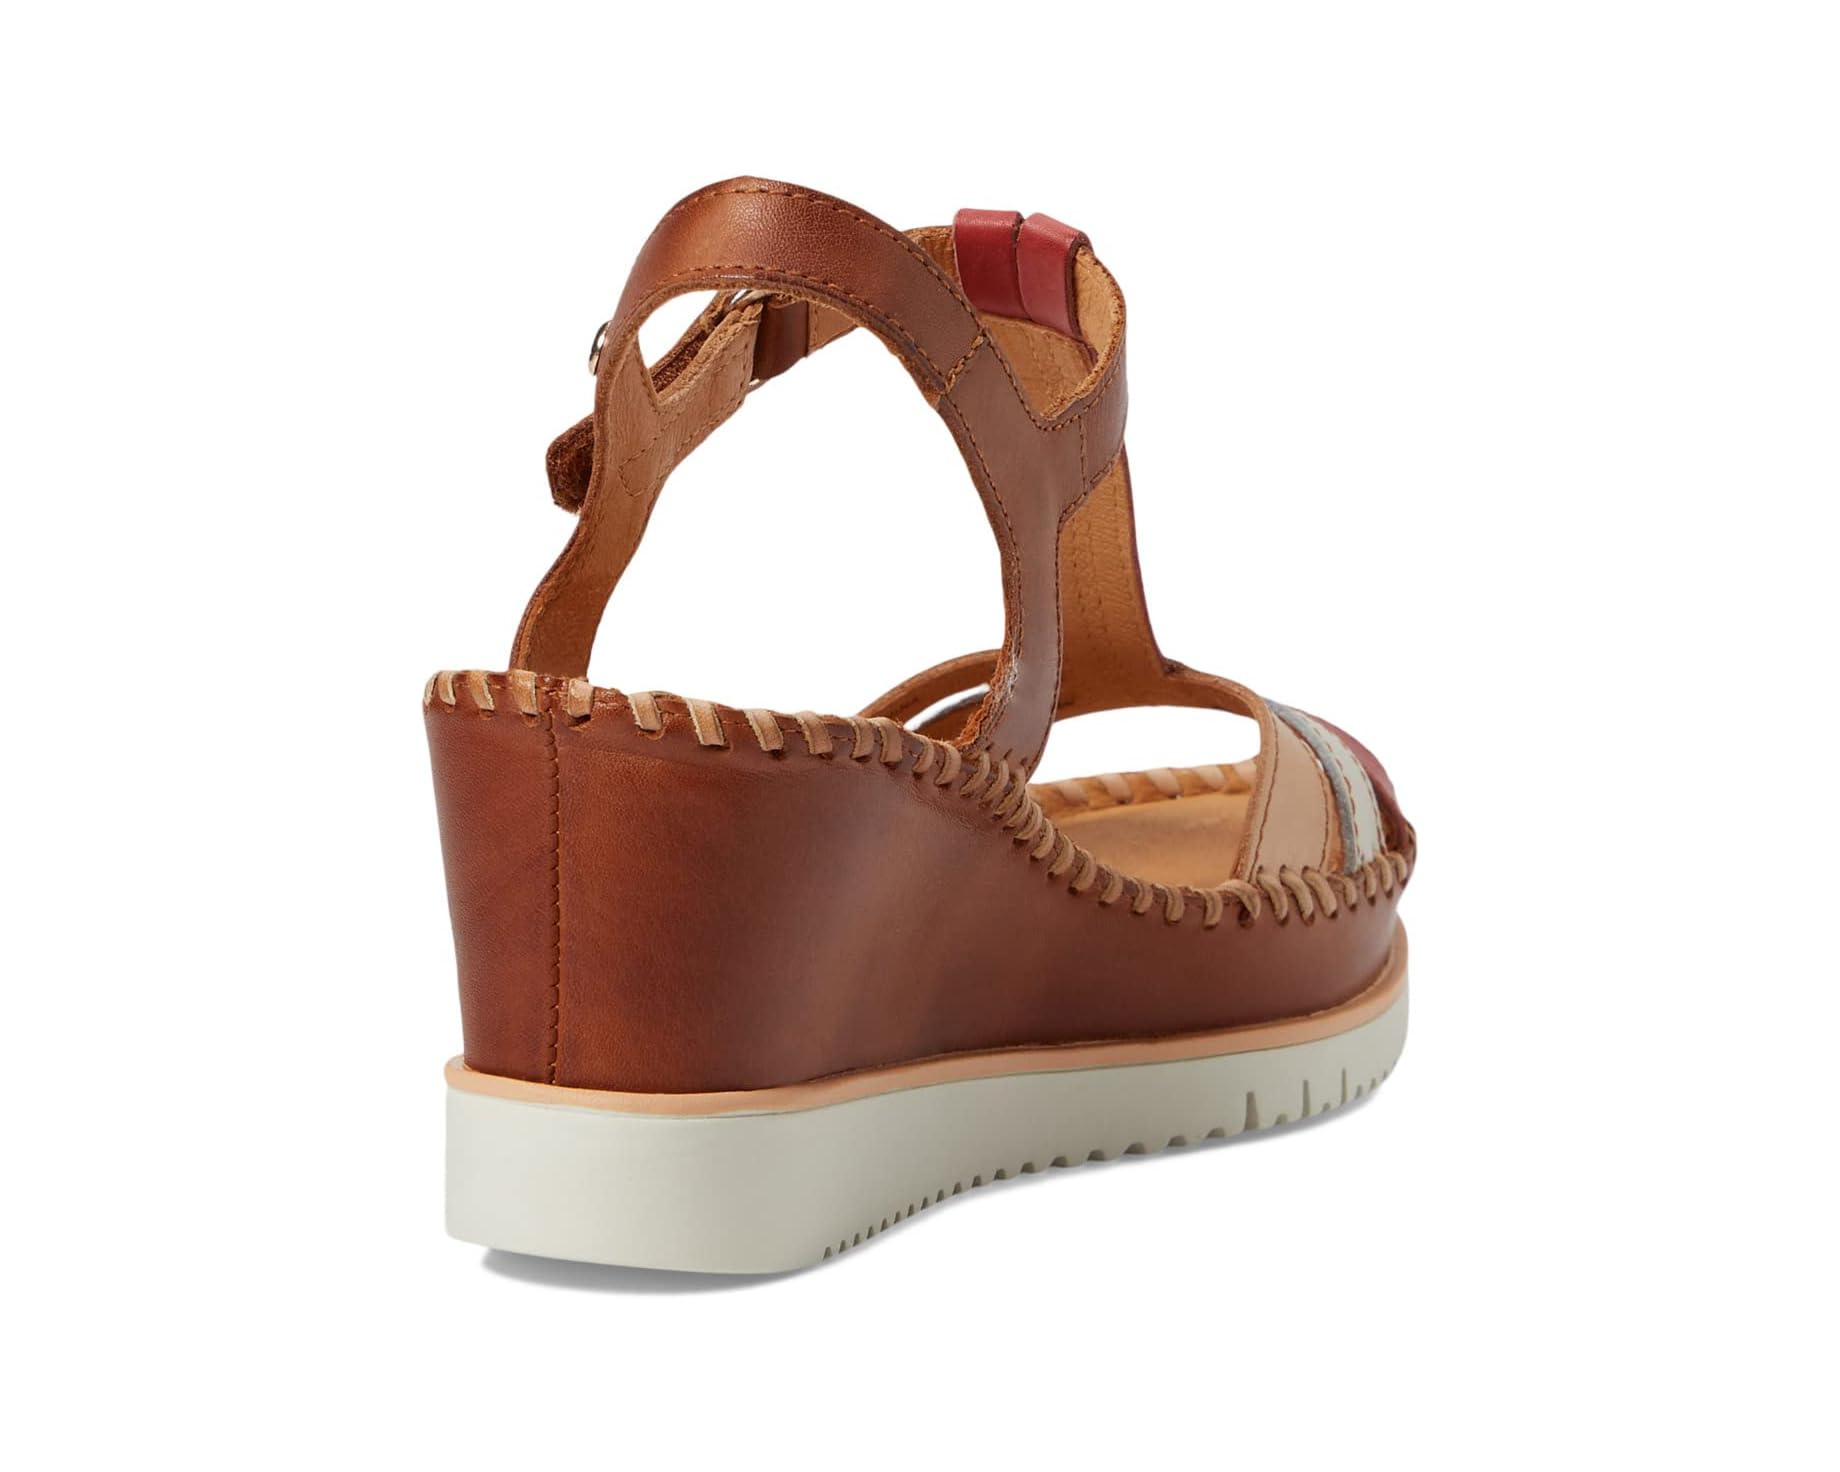 Pikolinos Aguadulce Wedge Sandals Women's 9